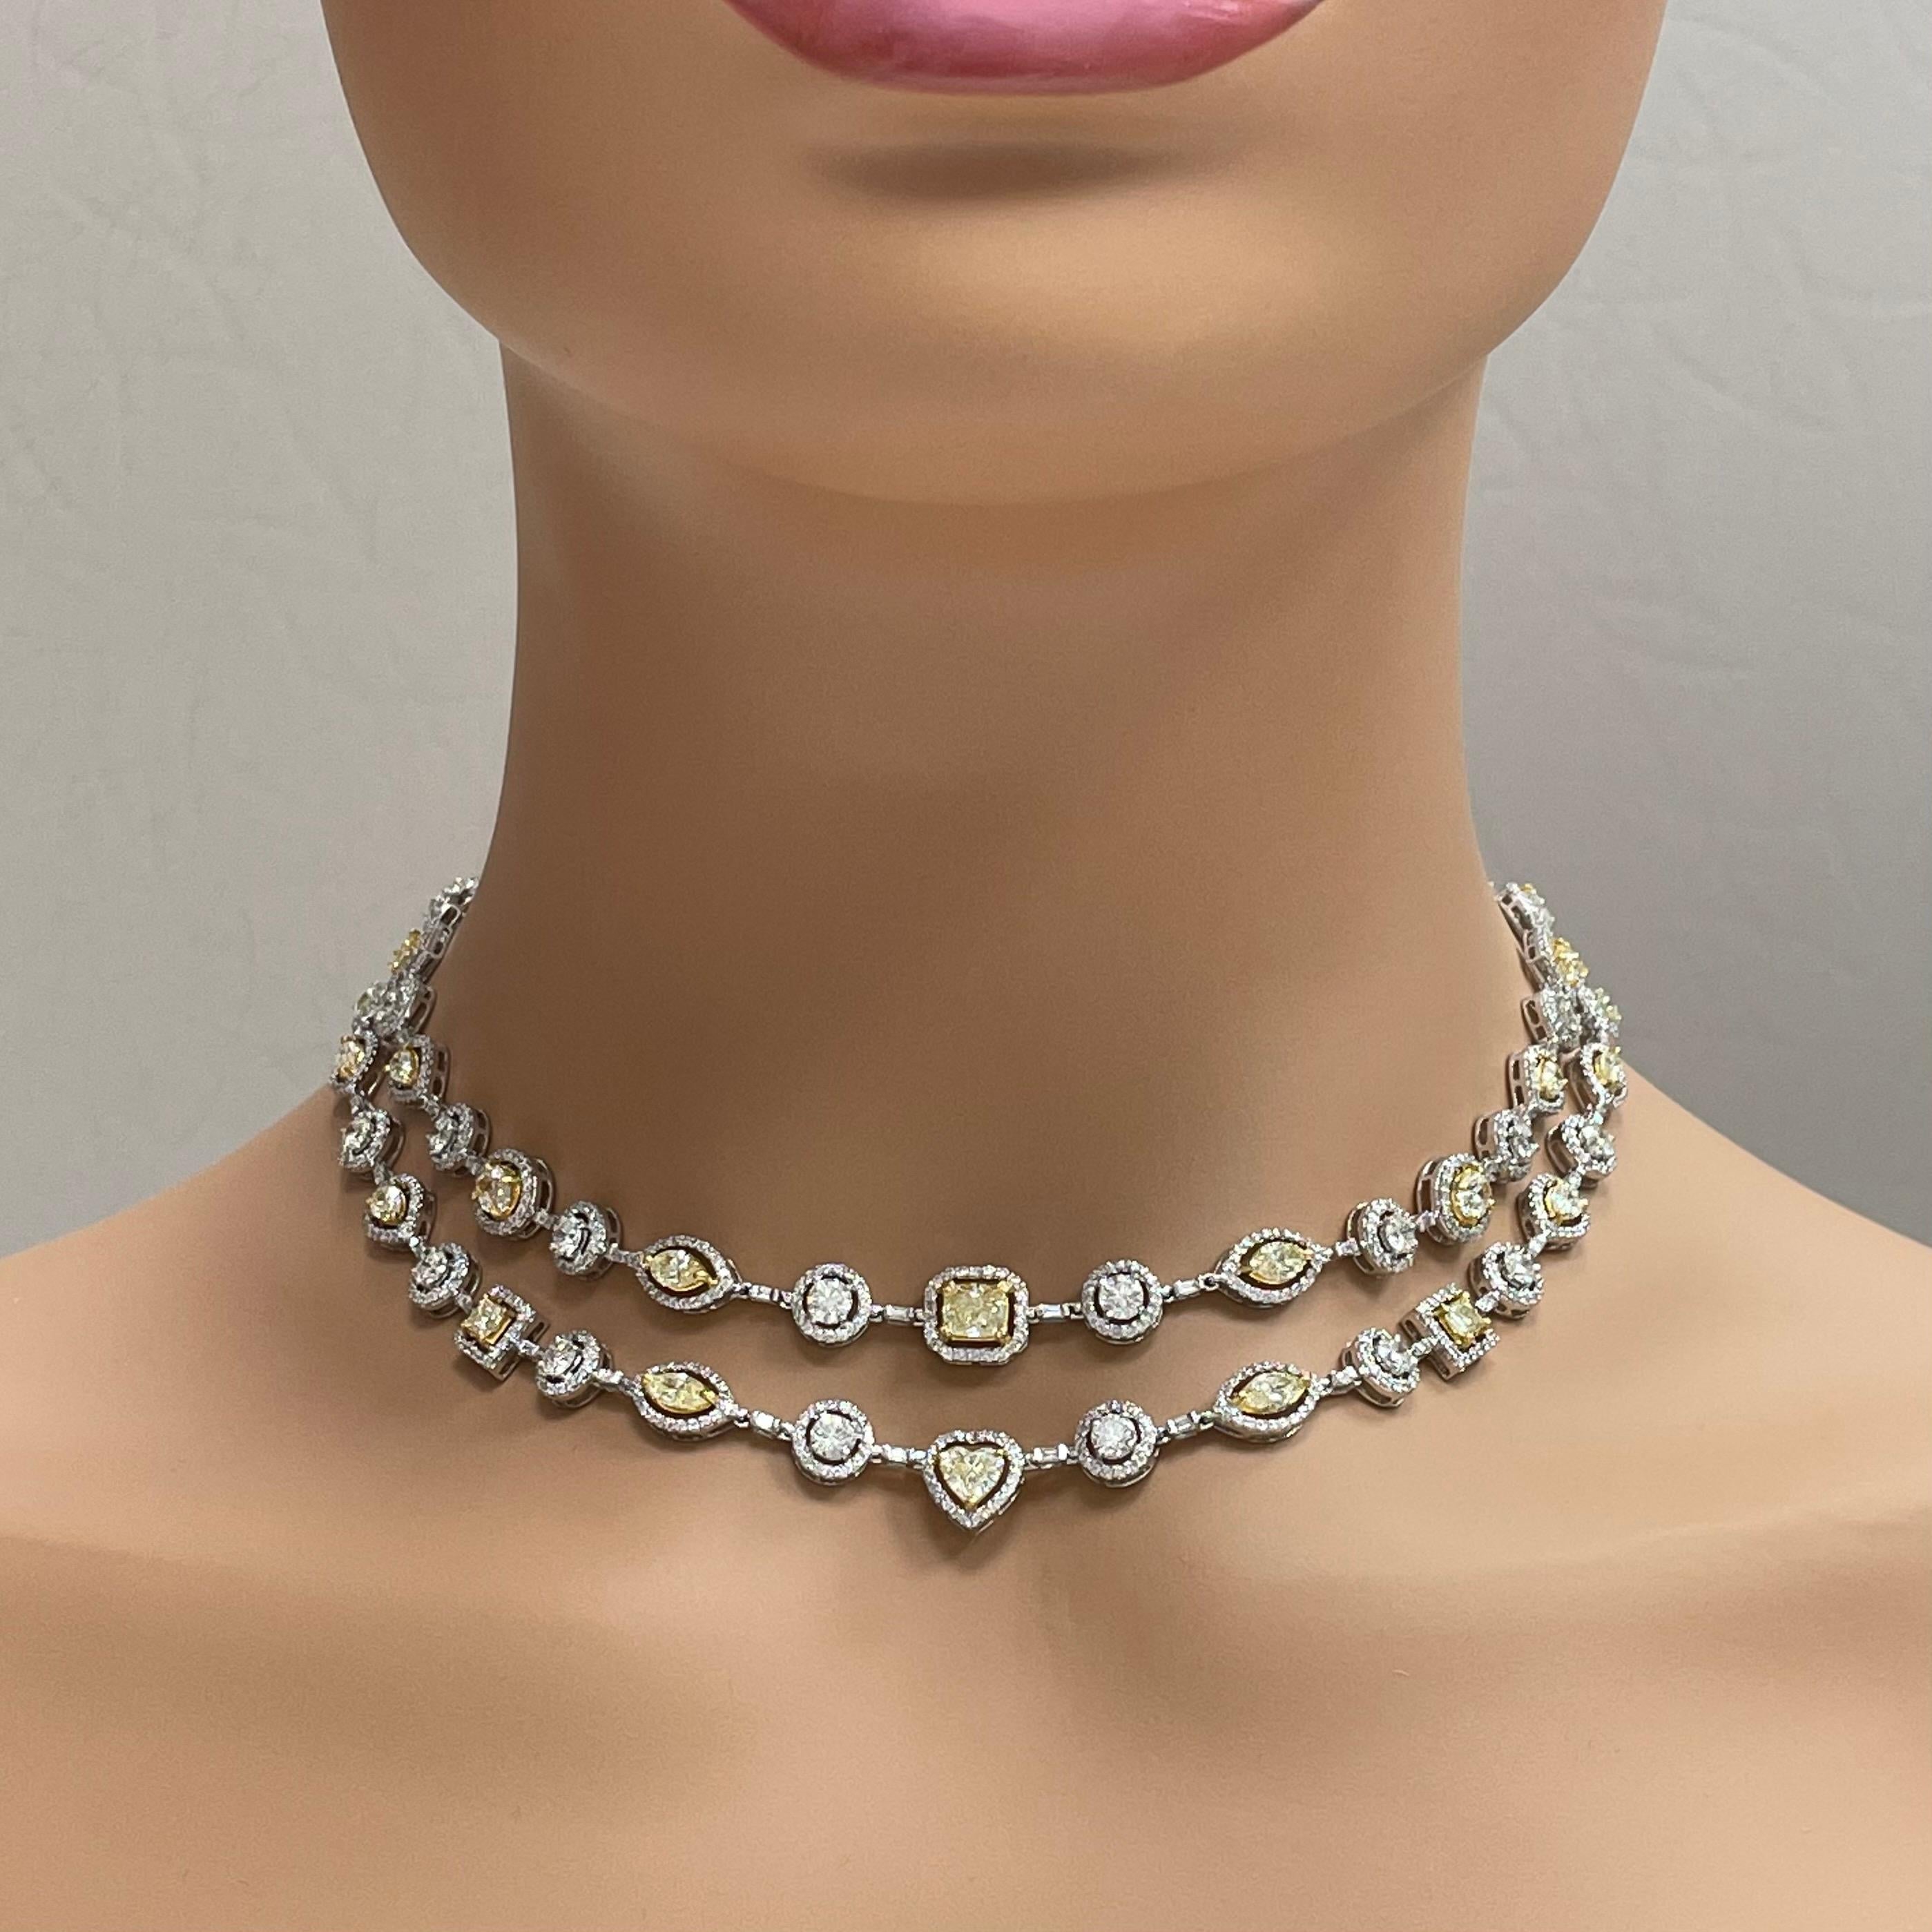 The Beauvince Summer Yellow & White Diamond Necklace features a double string halo necklace that is delicate and flamboyant. It is perfect for a cocktail, a gala, a wedding or the red carpet.

Diamonds Shapes: Cushion, Trilliant, Heart Shape,